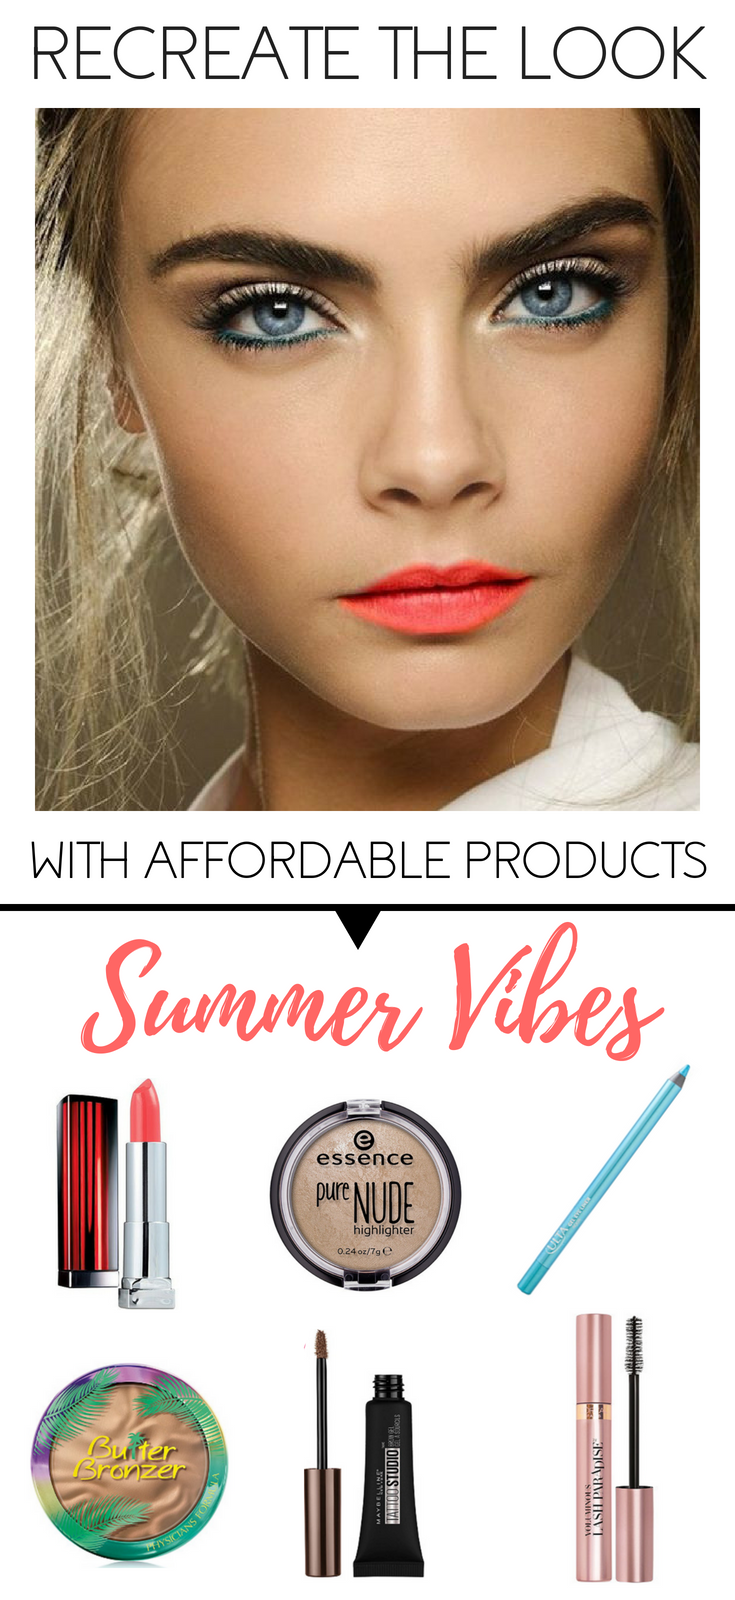 Recreate The Look: Summer Vibes